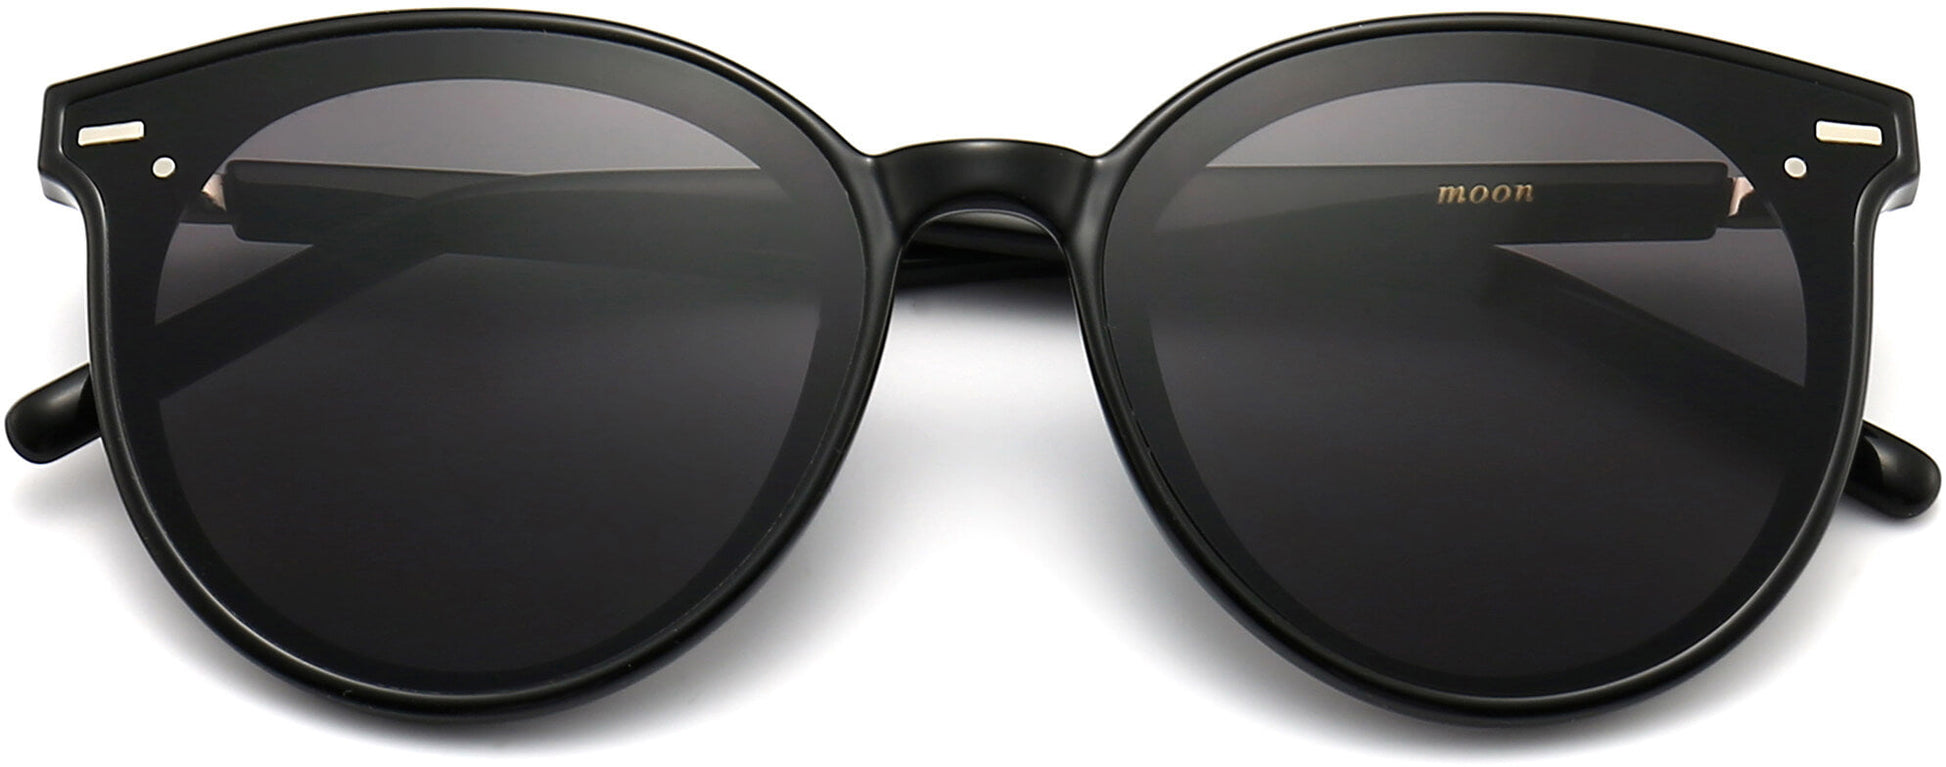 Julian Black Stainless steel Sunglasses from ANRRI, closed view